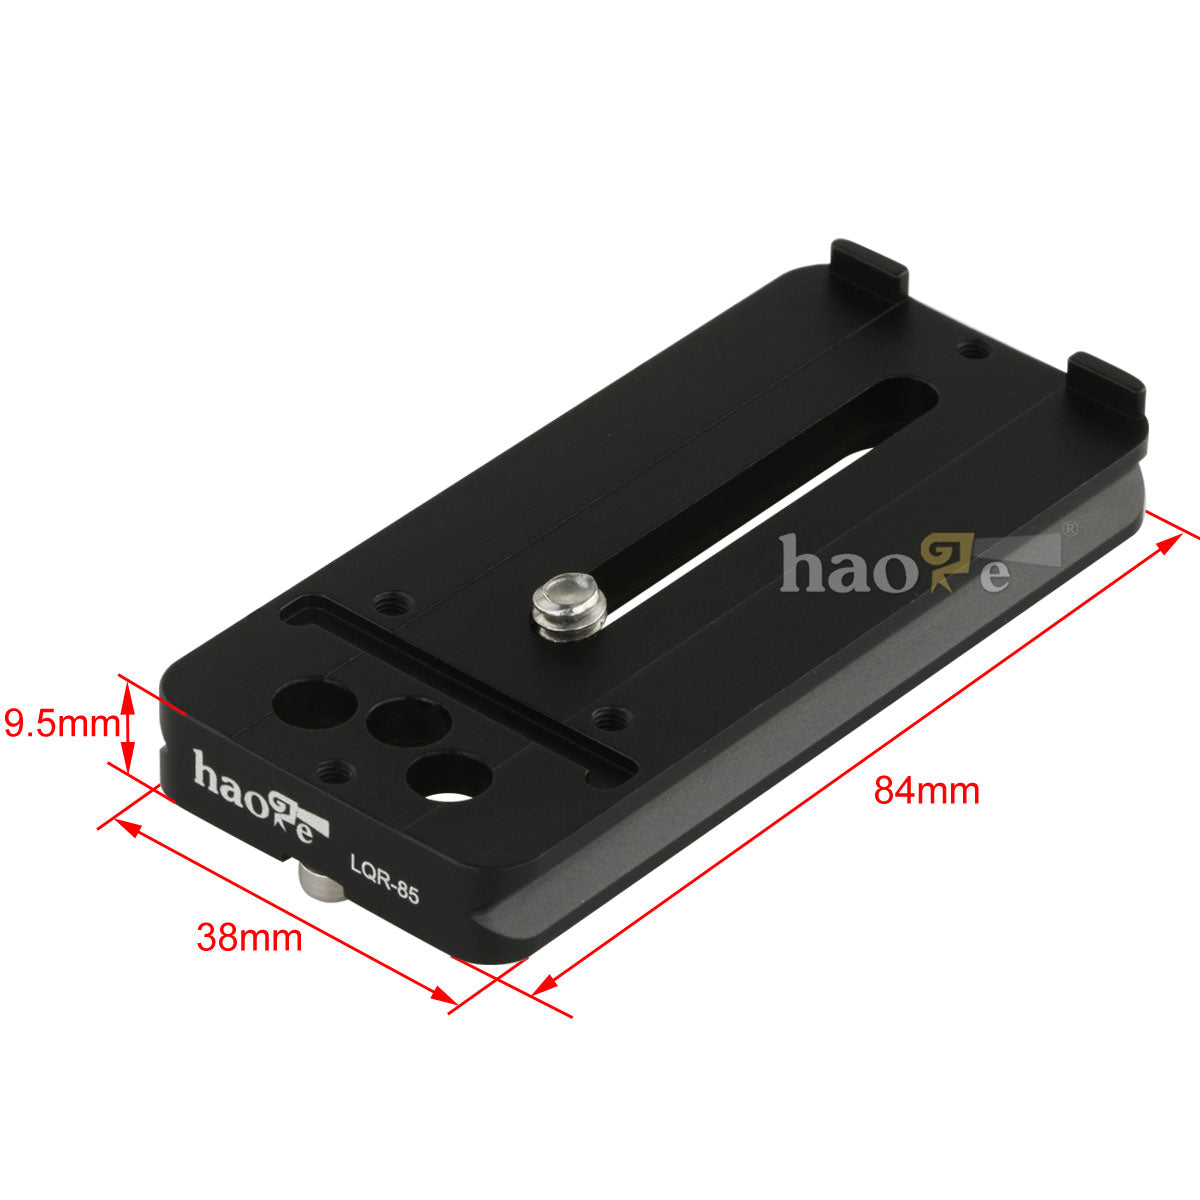 Haoge 84mm LQR-85 Lens Plate Quick Release for Canon Nikon Minolta Tokina Tamron Sigma Tele Lenses Compatible with Arca Swiss